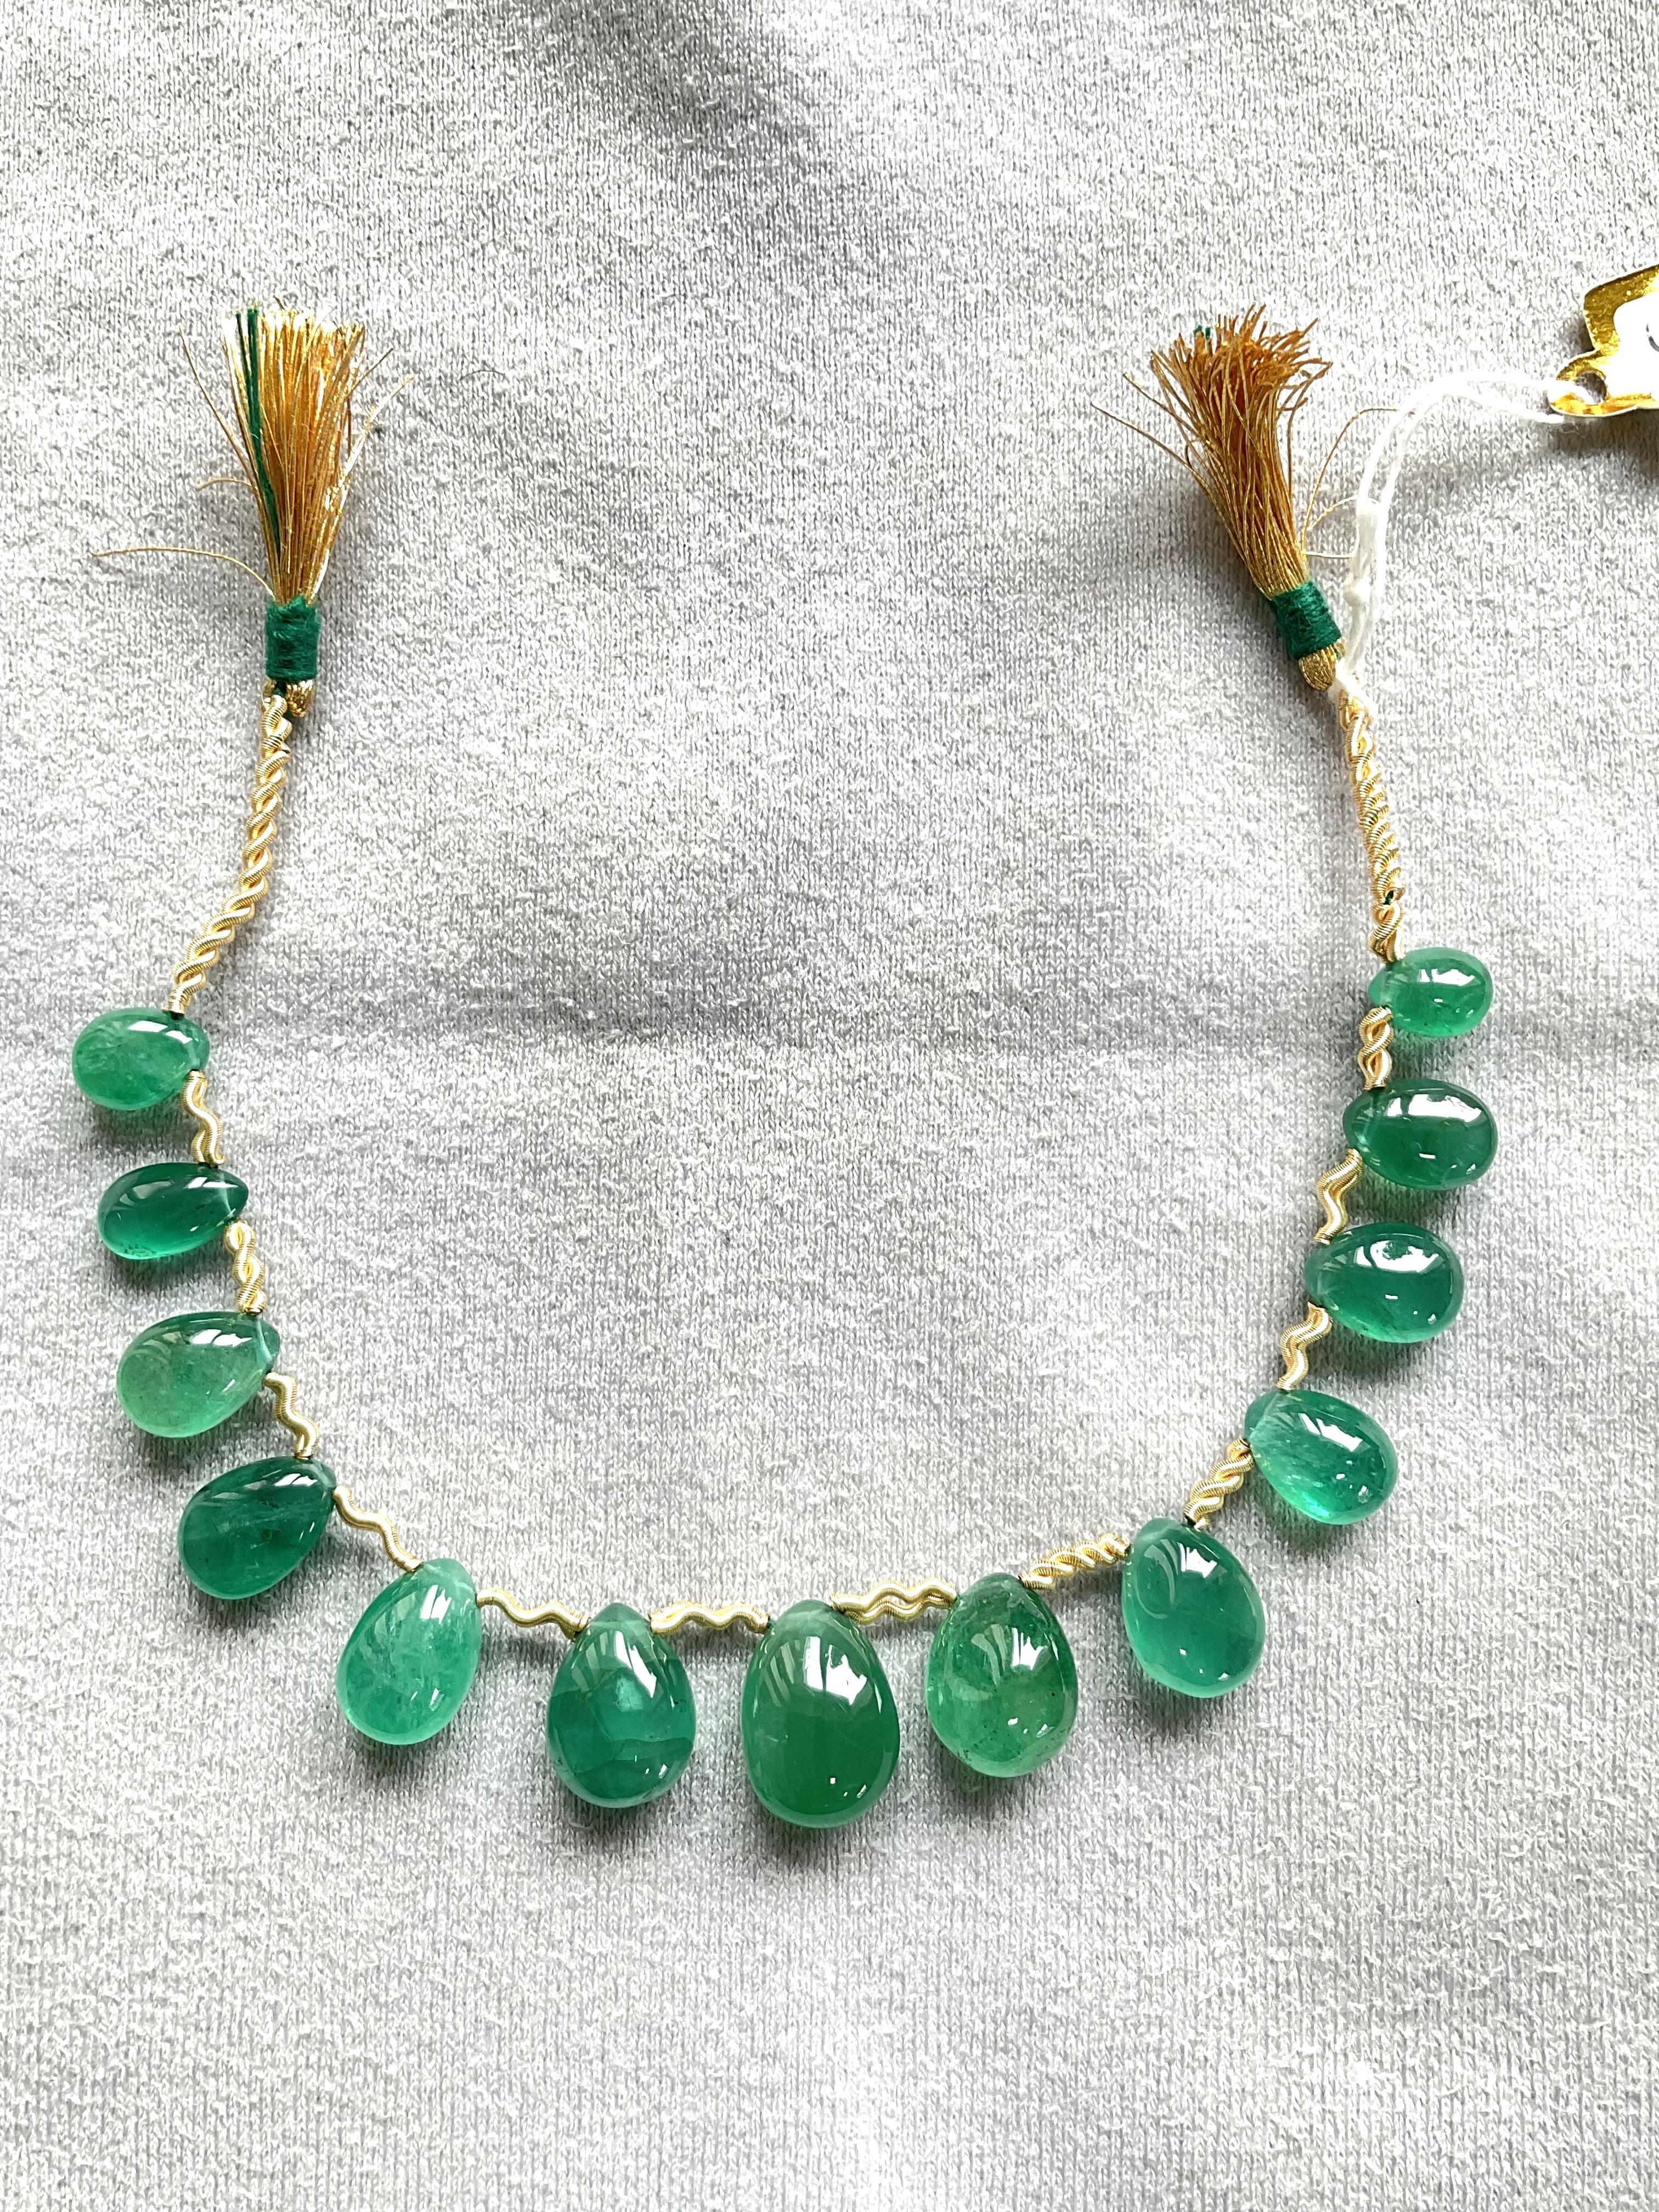 64.75 Carats Zambian Emerald Drops Plain Layout 13 Pieces For Fine Jewelry Gem In New Condition For Sale In Jaipur, RJ